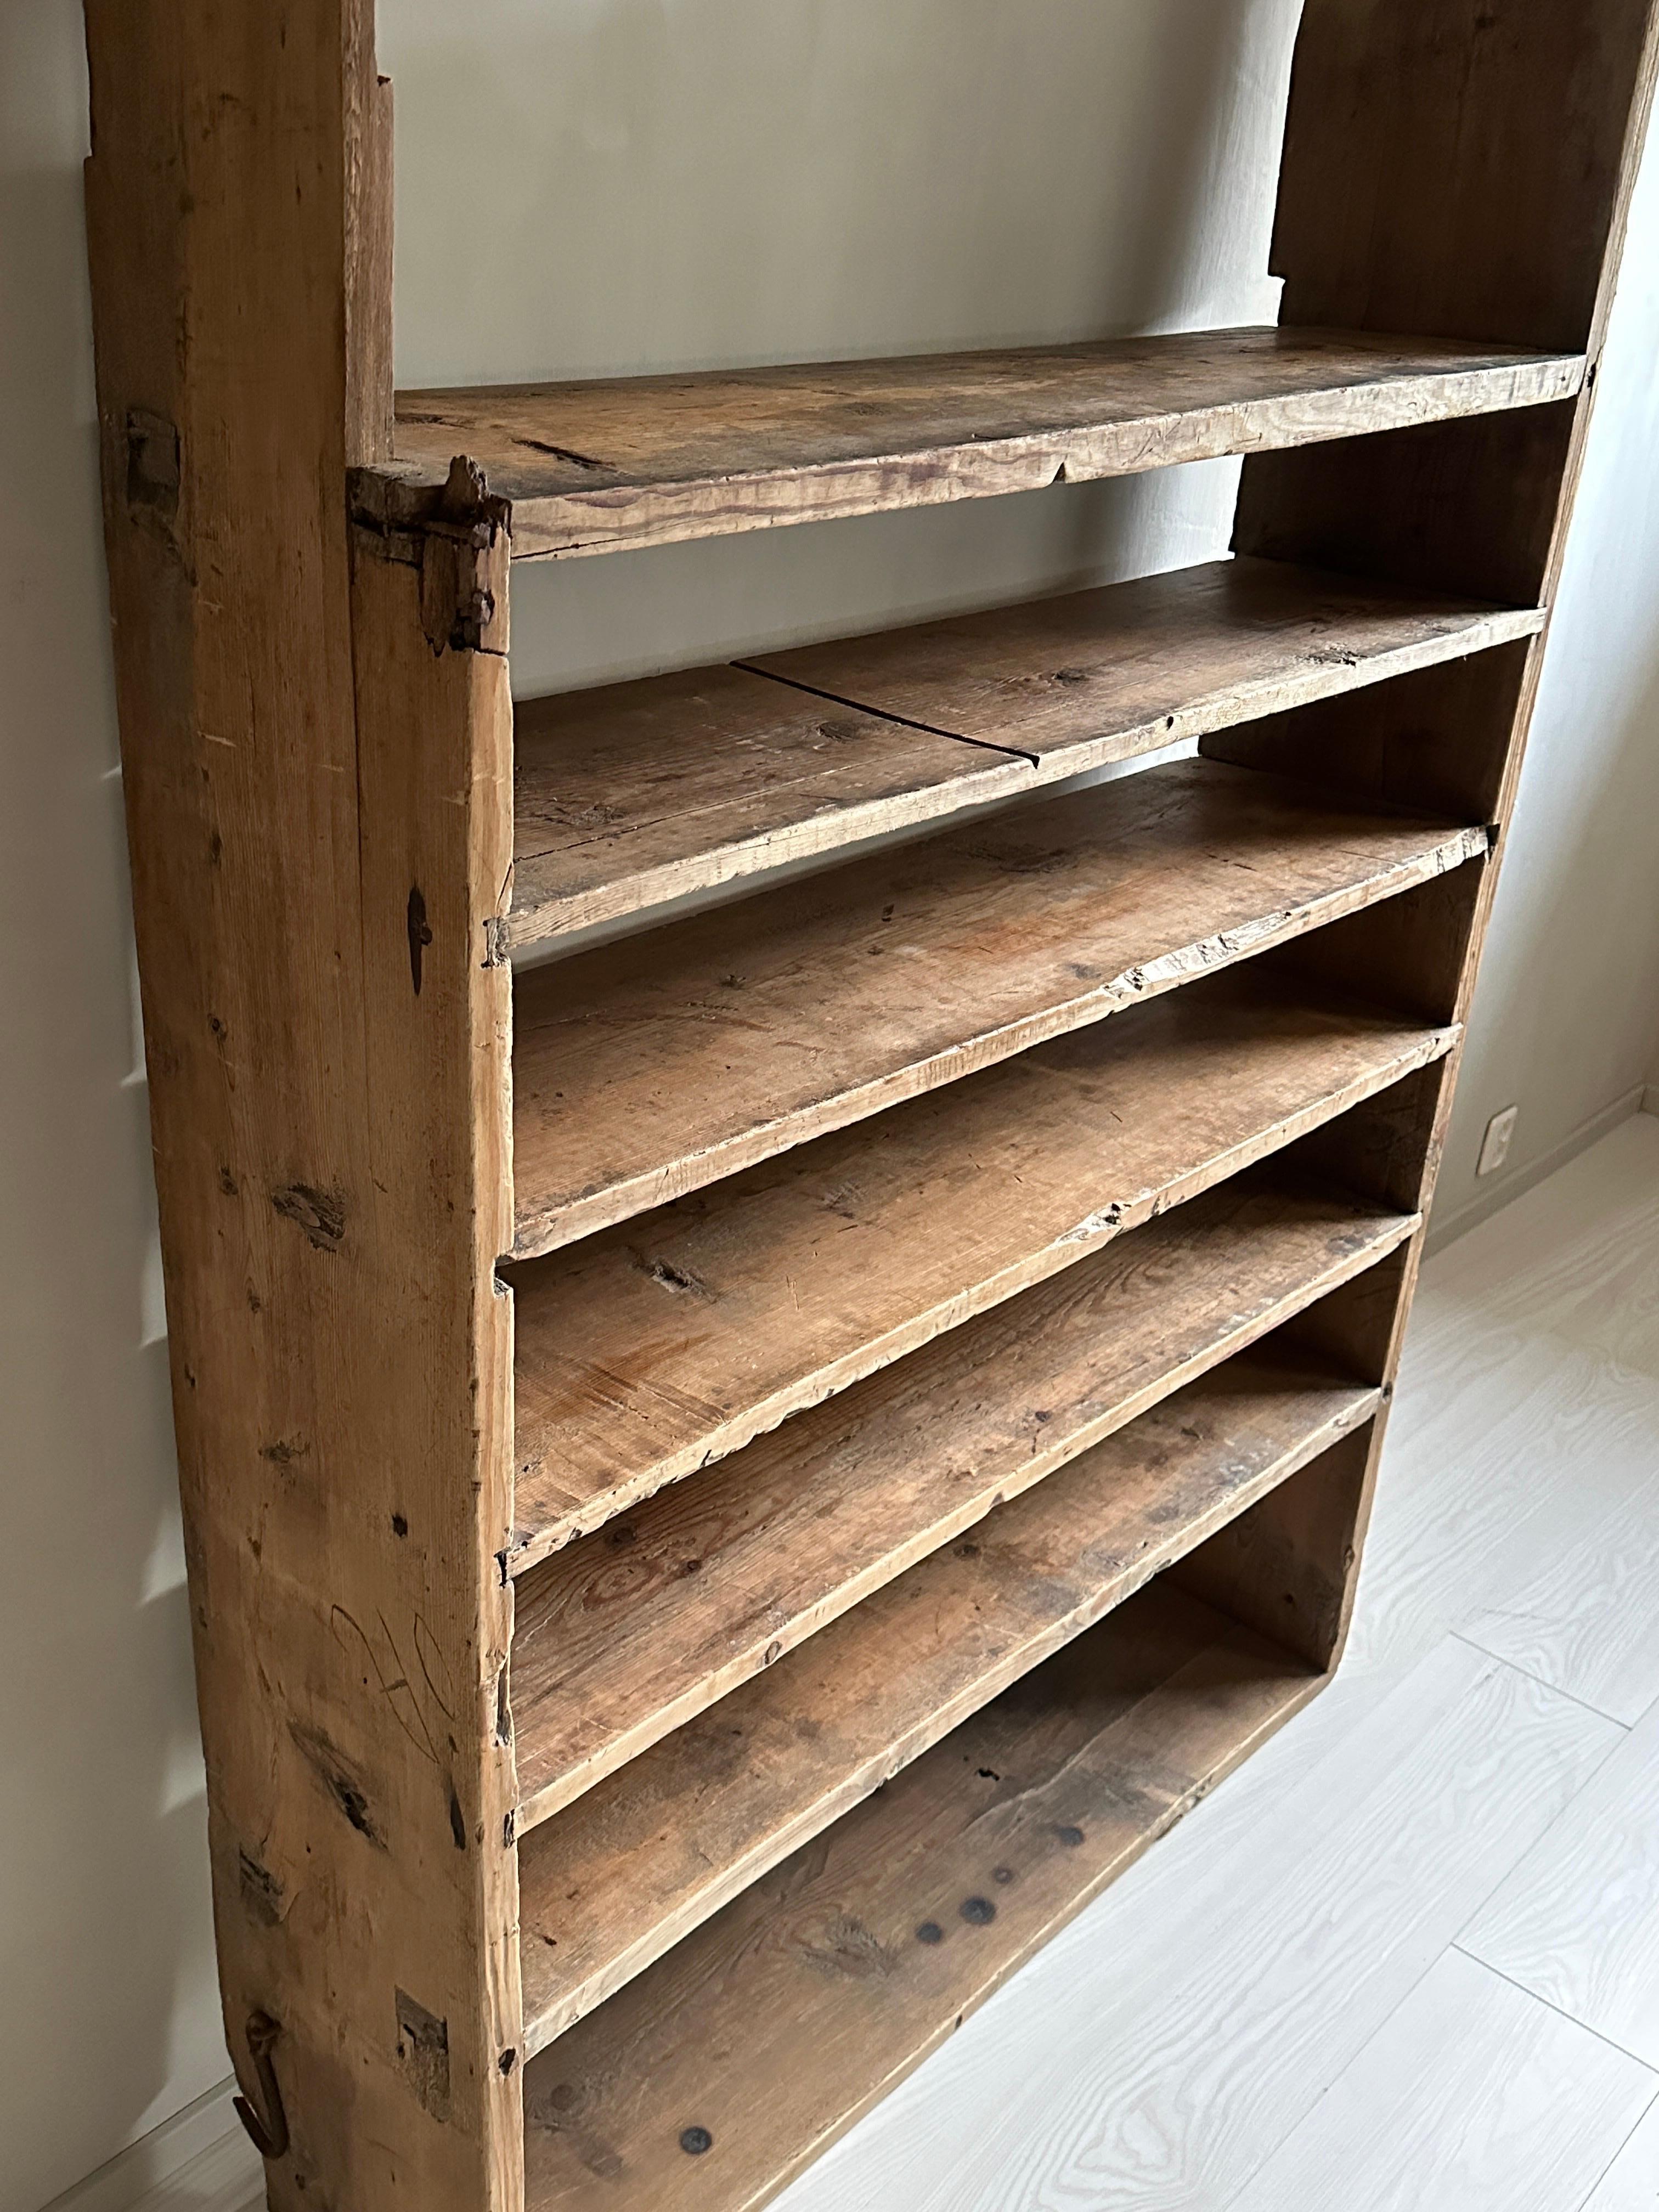 Beautiful antique book shelf in pine. Handcrafted by a Swedish cabinetmaker in late 1700s.

A great vintage book shelf with a lovely patina. A bit unsteady if standing alone, so should be attached to a wall

A unique rustic piece that fit in the